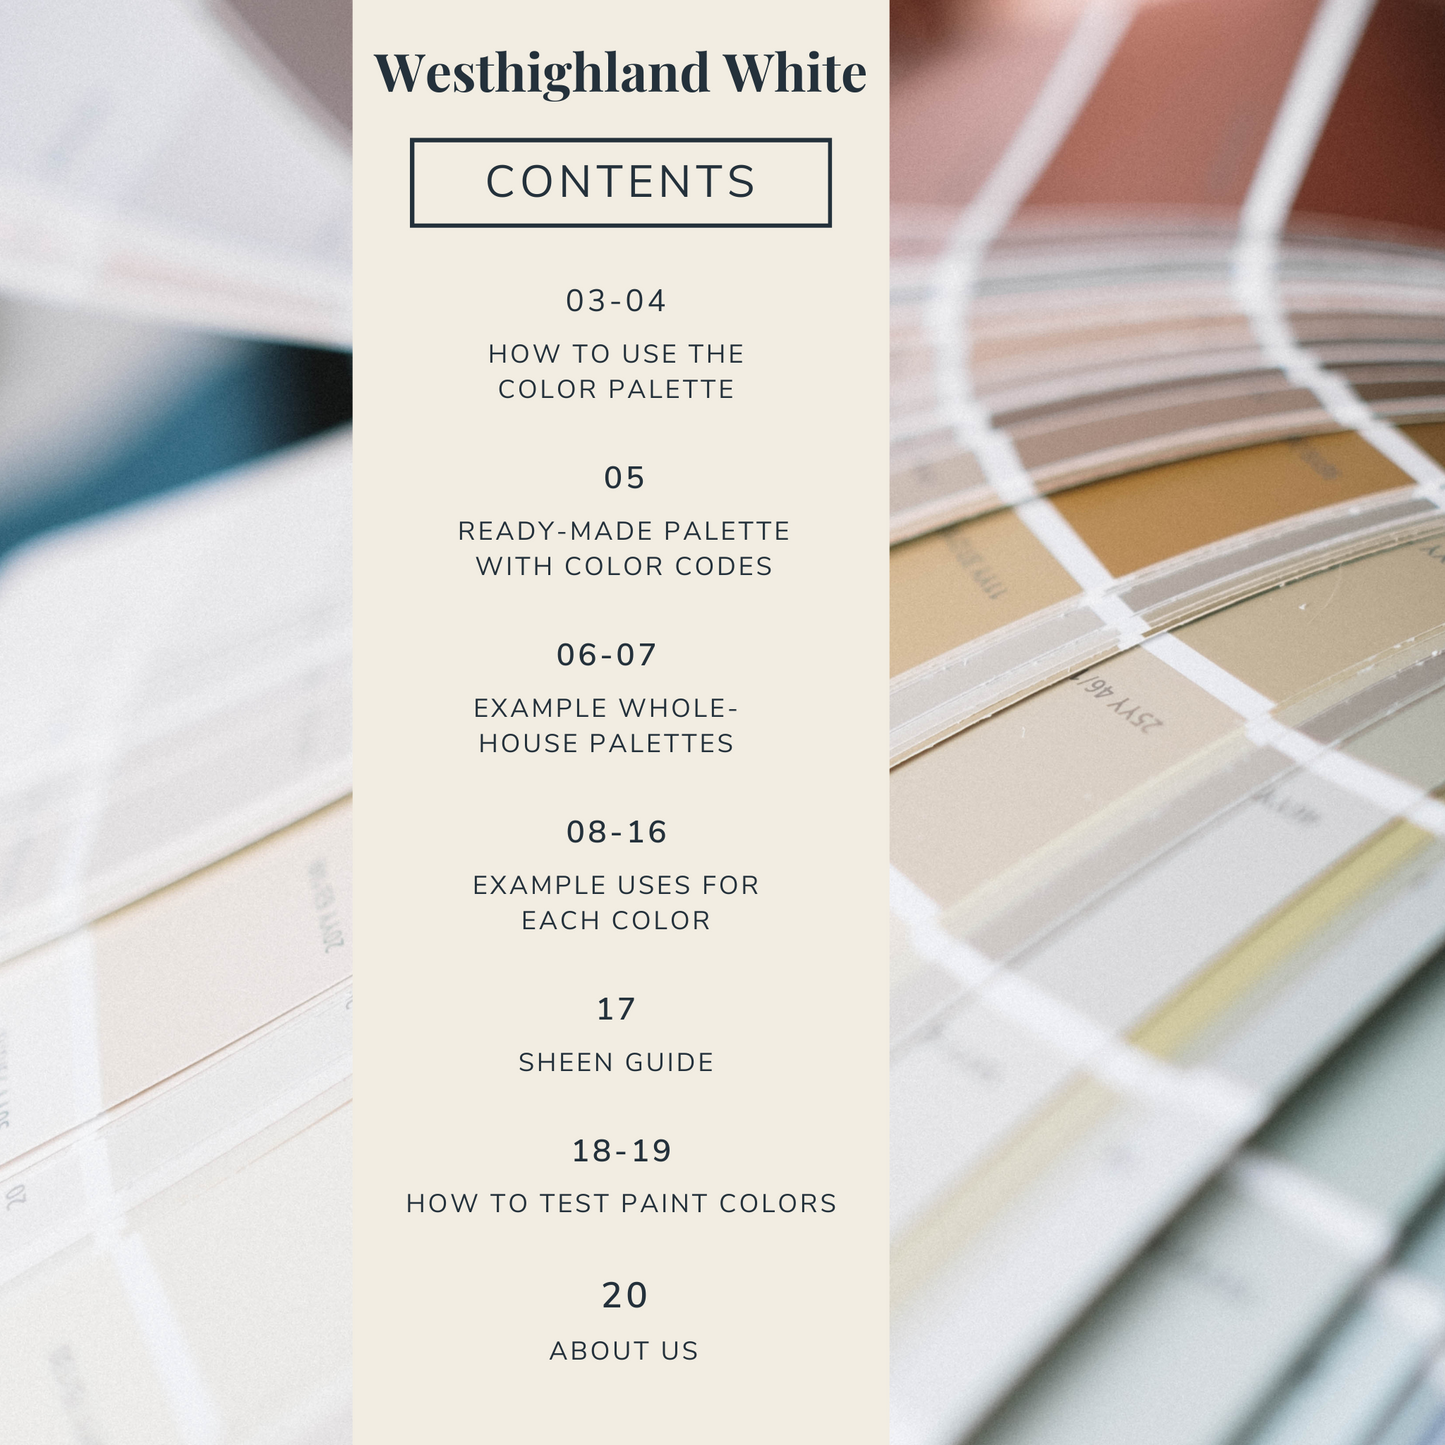 Contents list for a Sherwin-Williams Westhighland White color palette guide